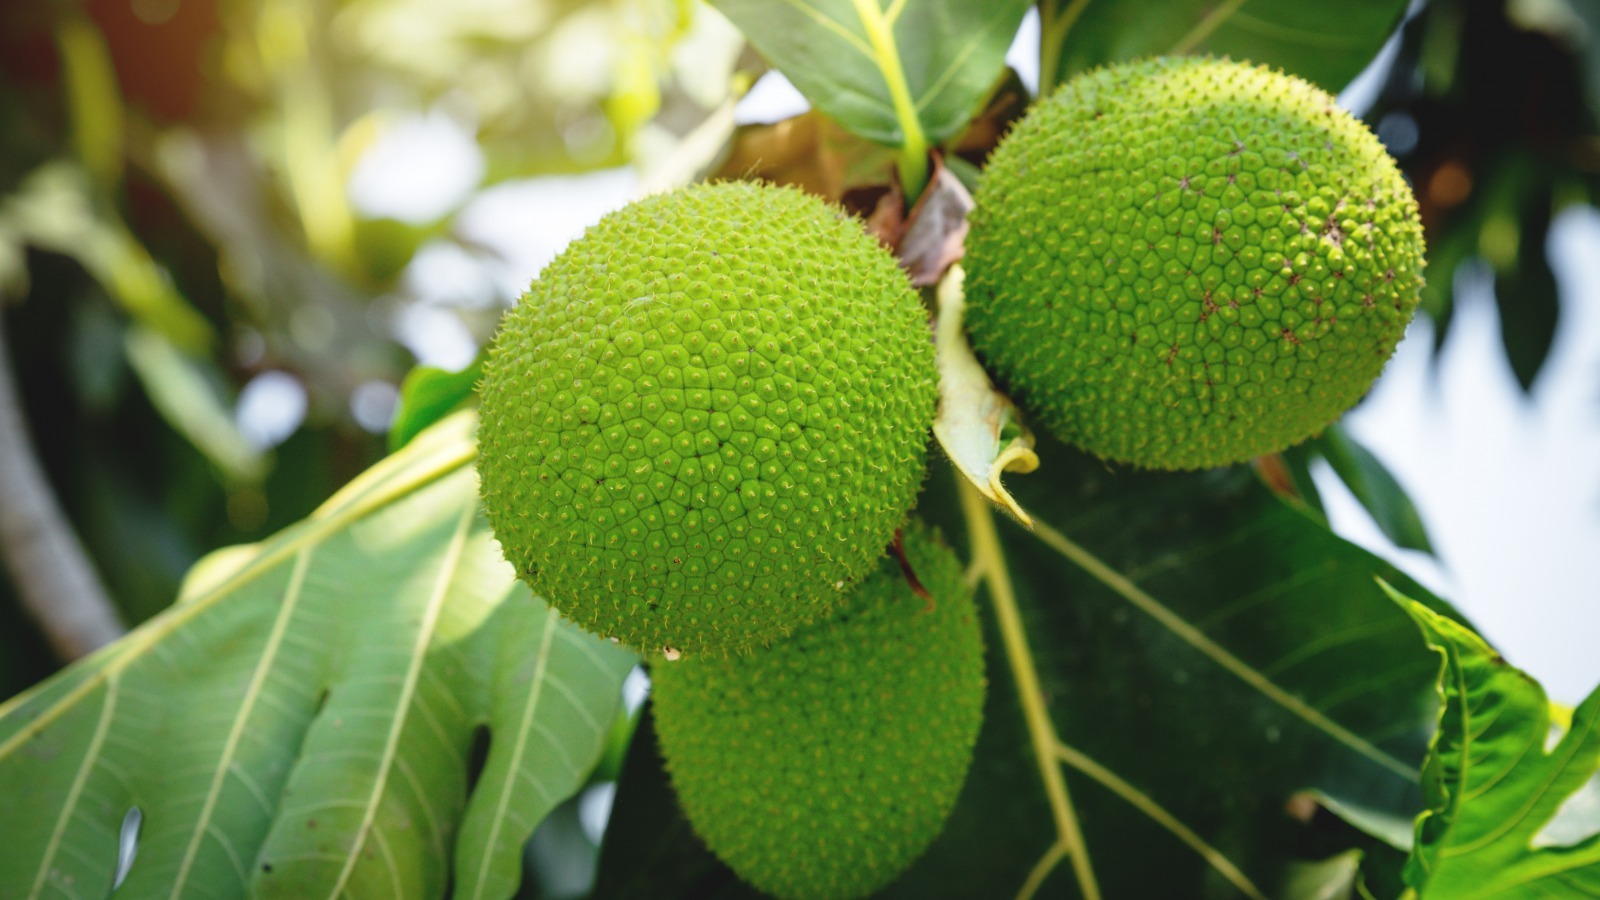 What Is Breadfruit And What Does It Taste Like? – Mashed